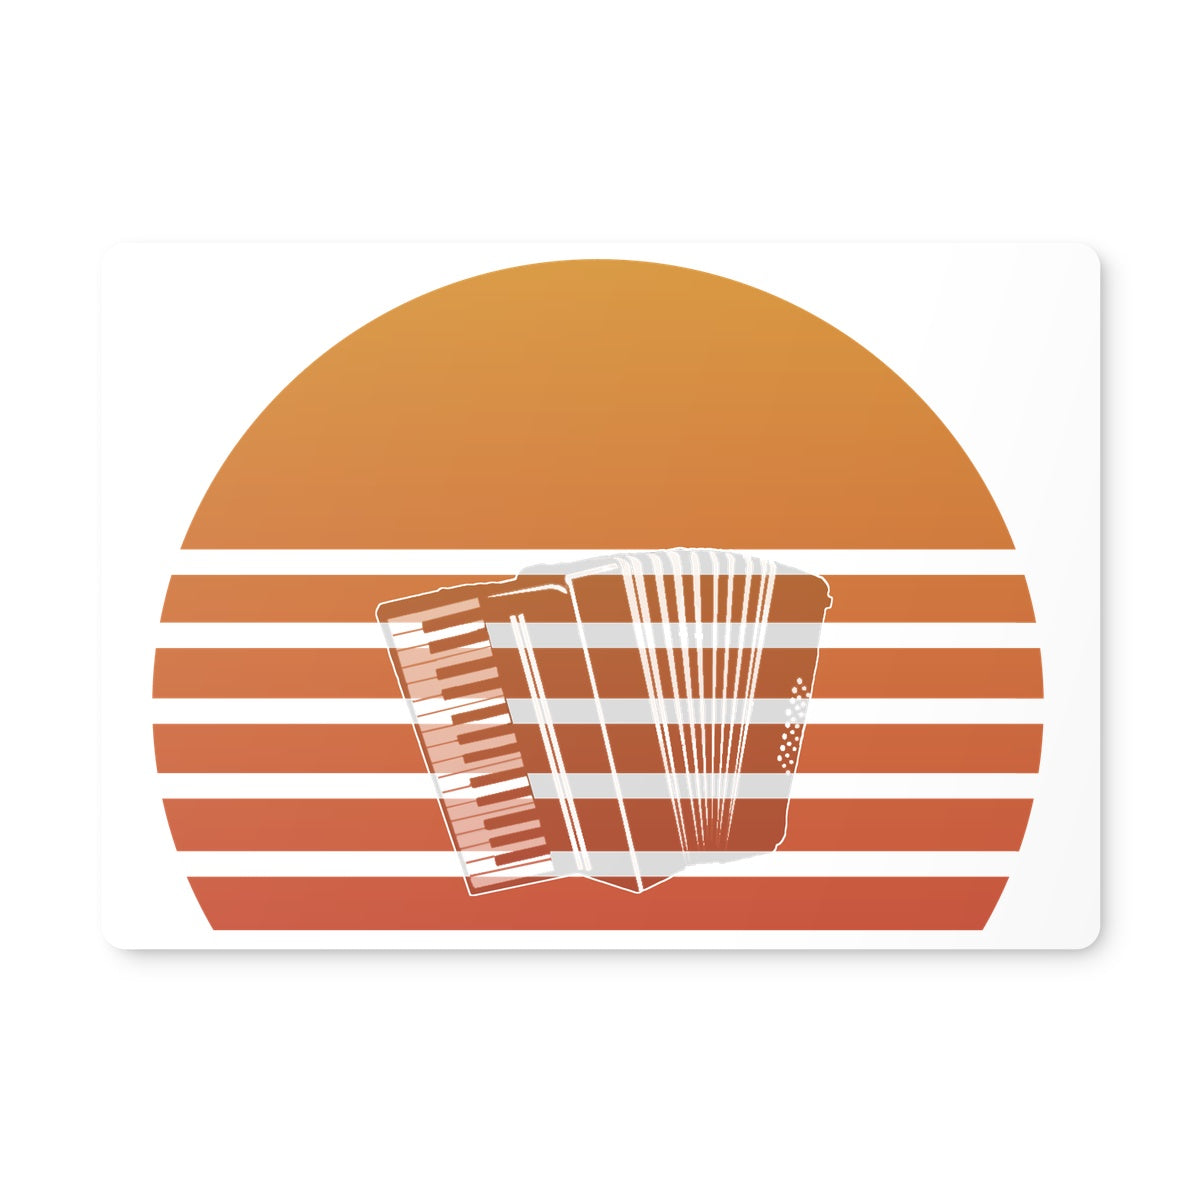 Sunset Accordion Placemat